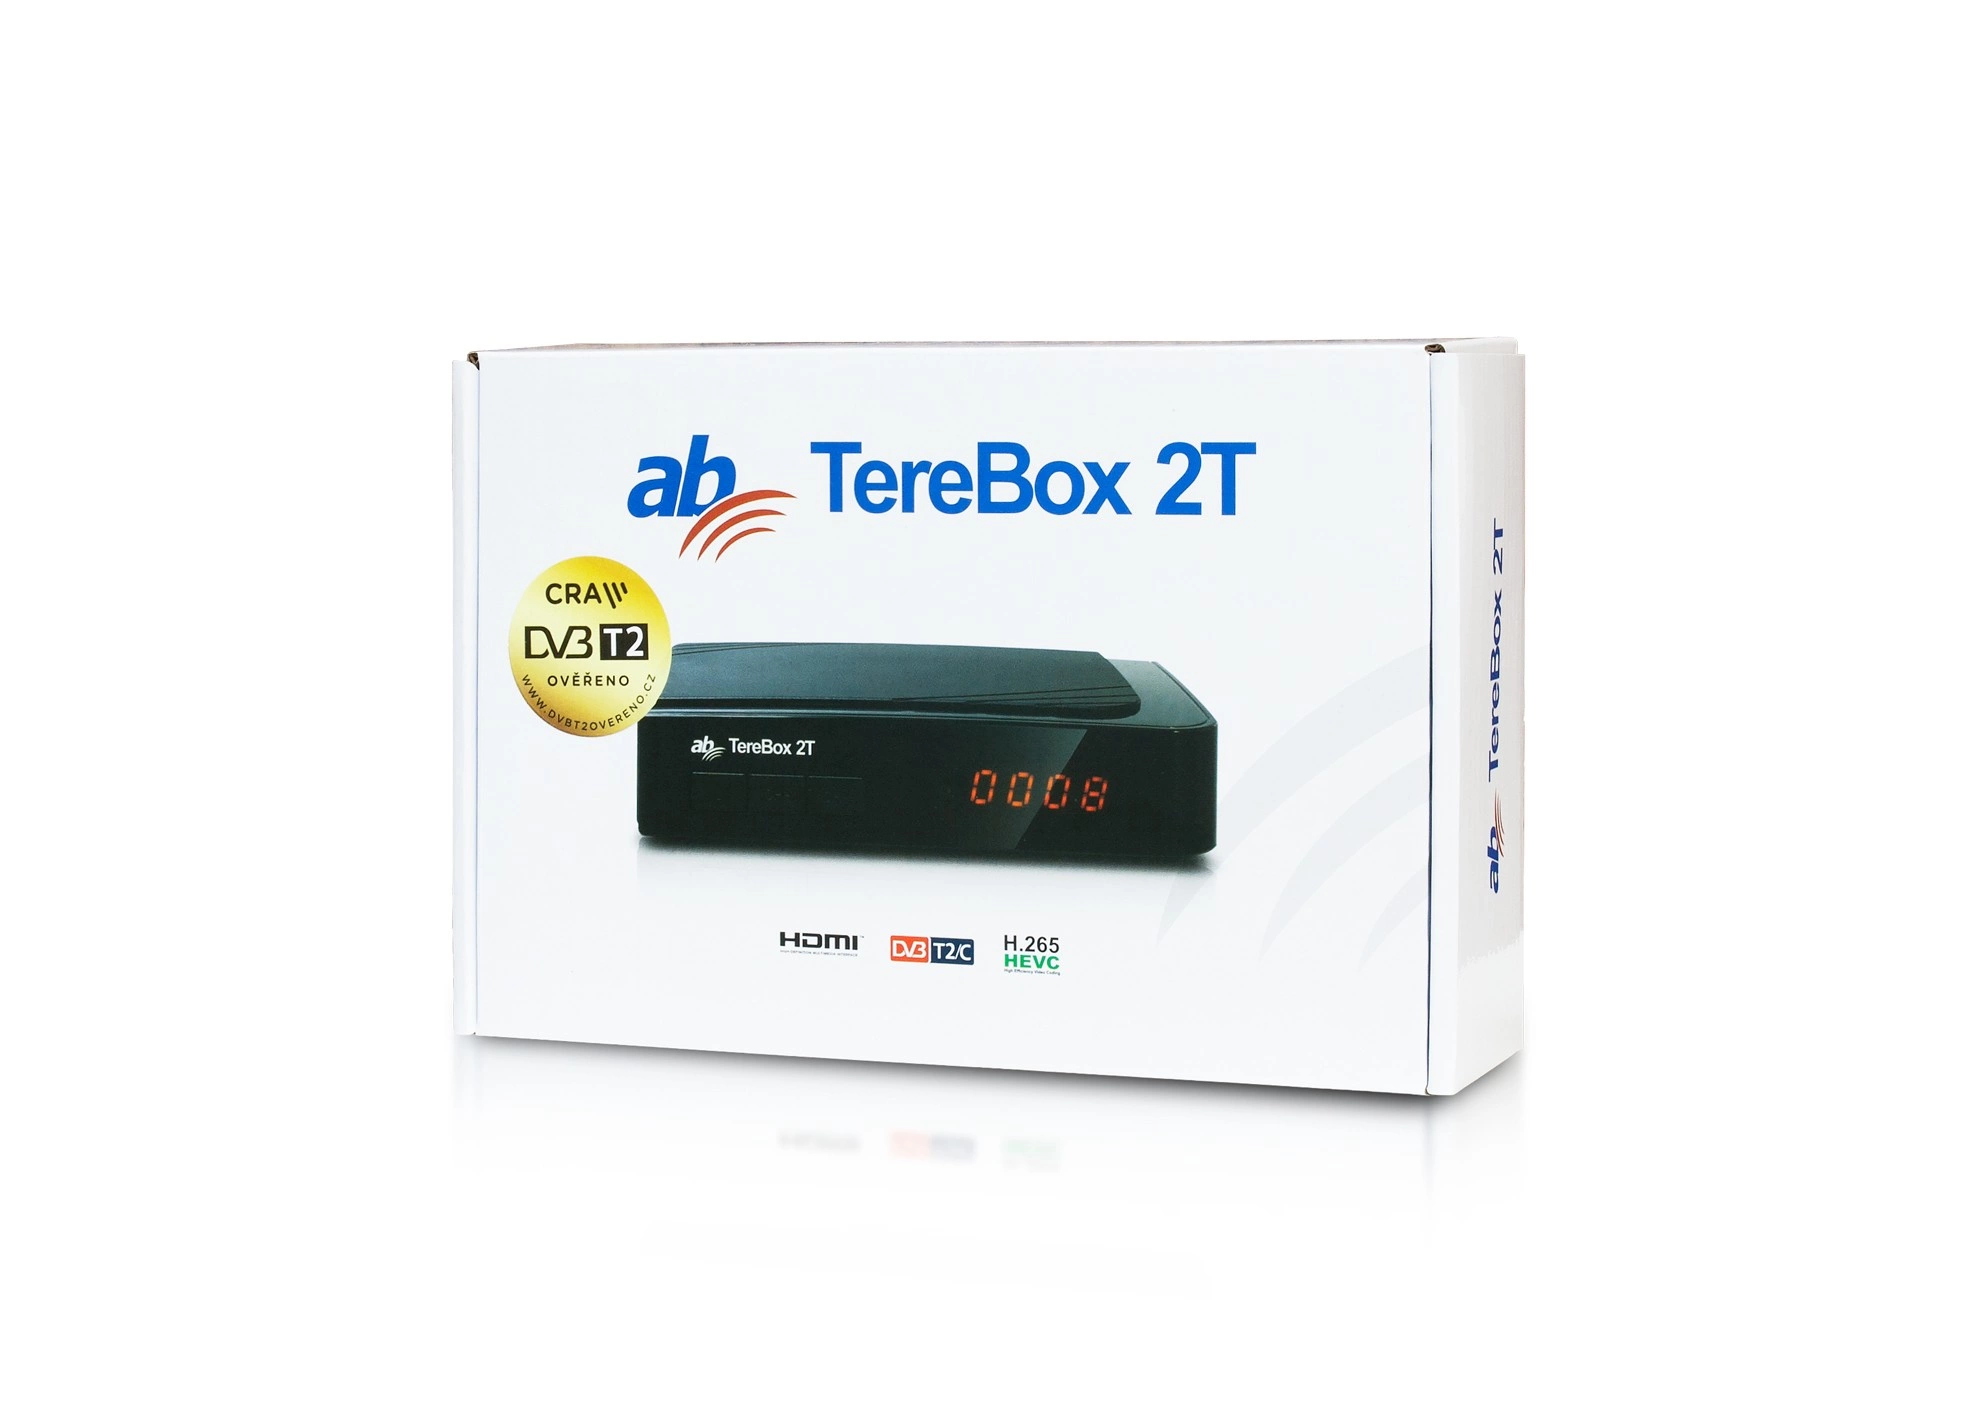 AB TereBox 2T HD terrestrial/cable receiver